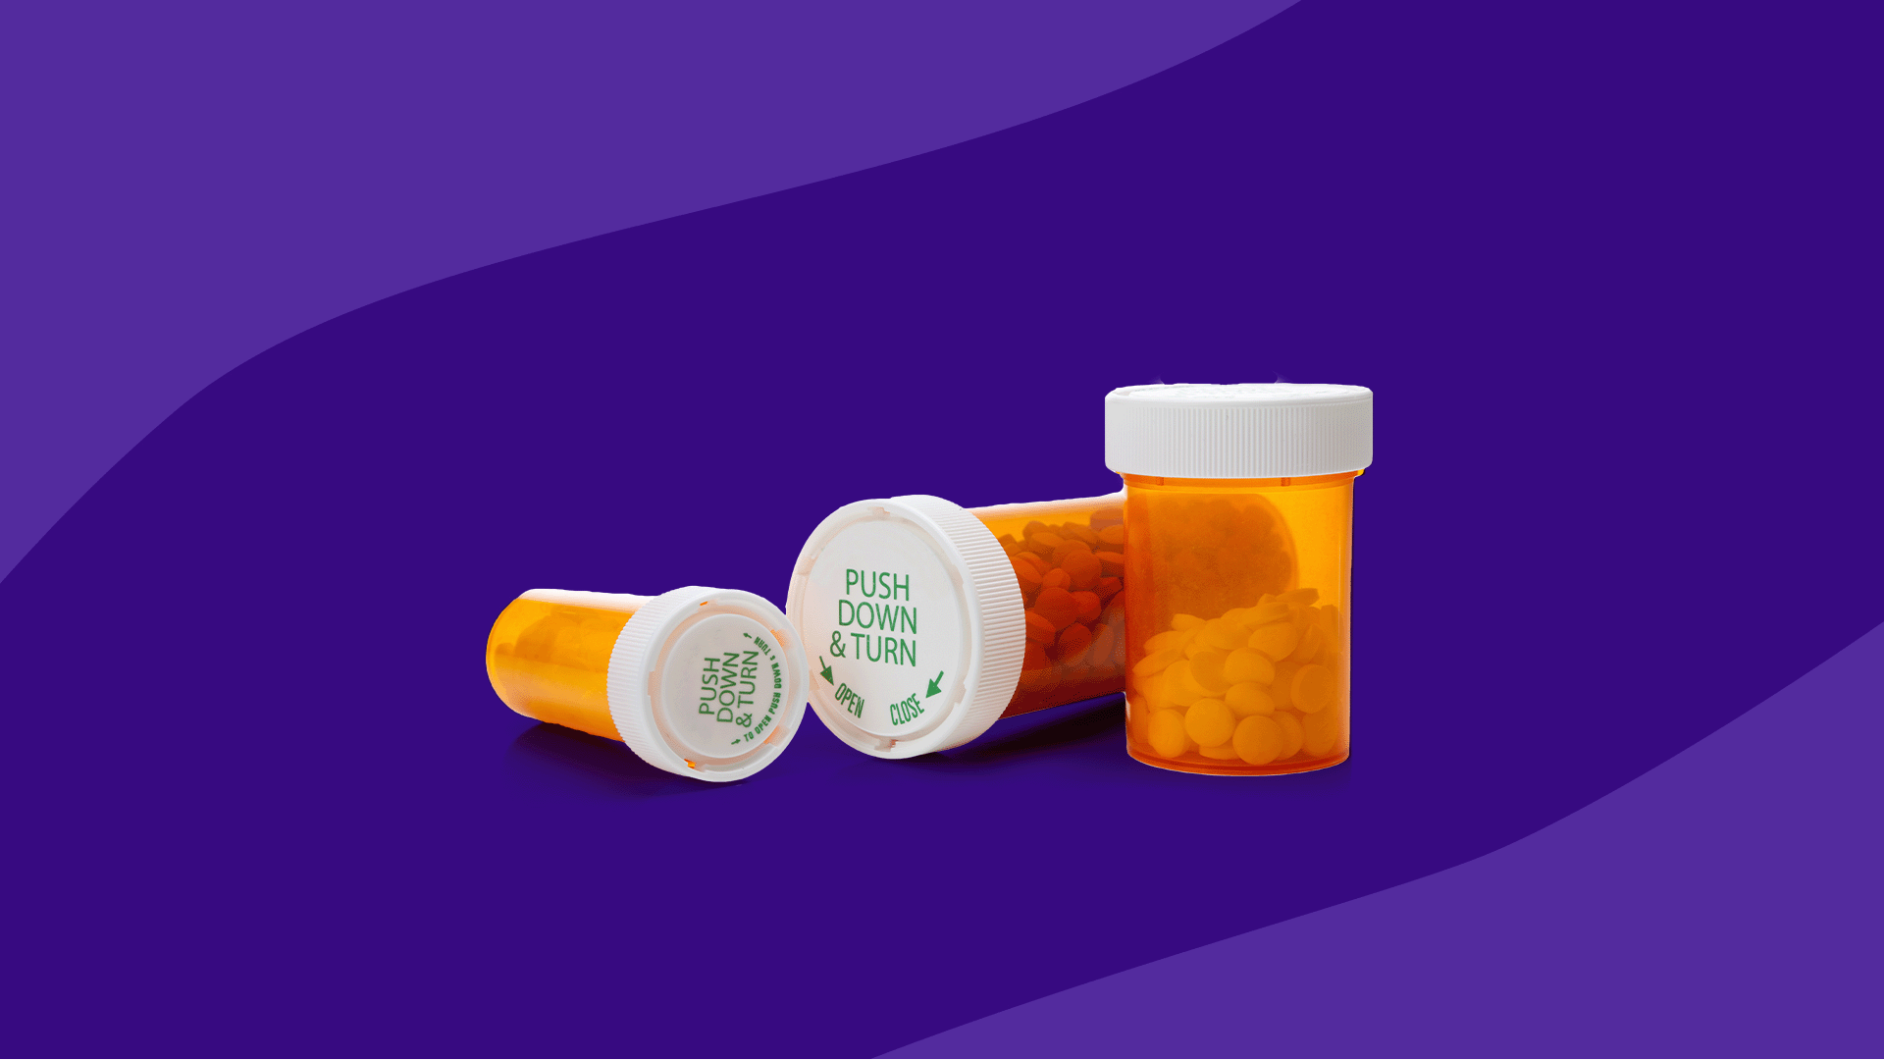 Rx pill bottles: How much is donepezil without insurance?